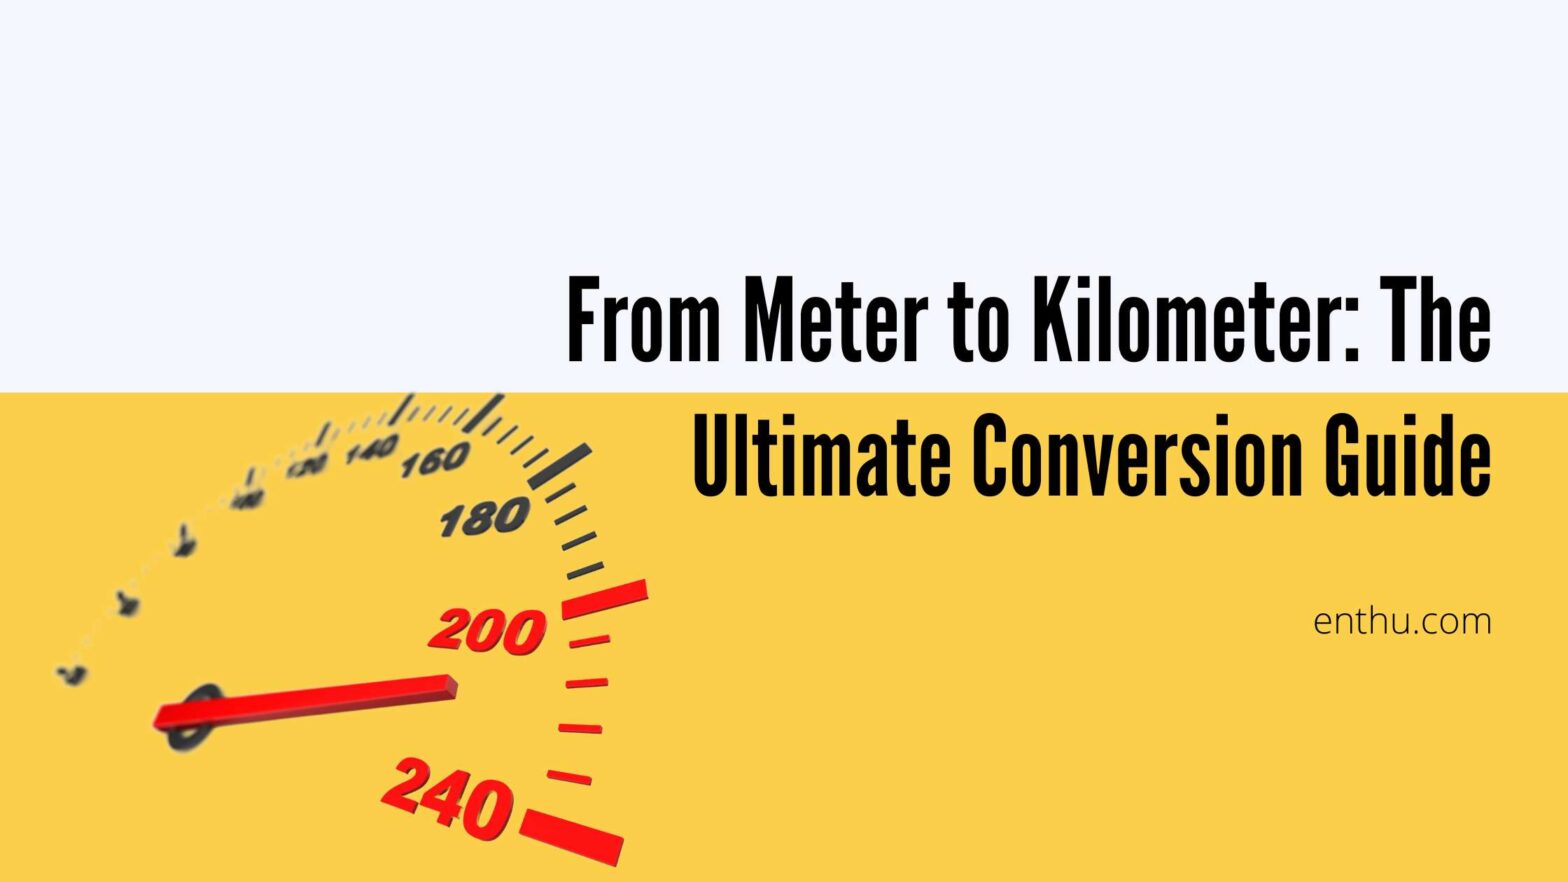 From Meter to Kilometer: The Ultimate Conversion Guide